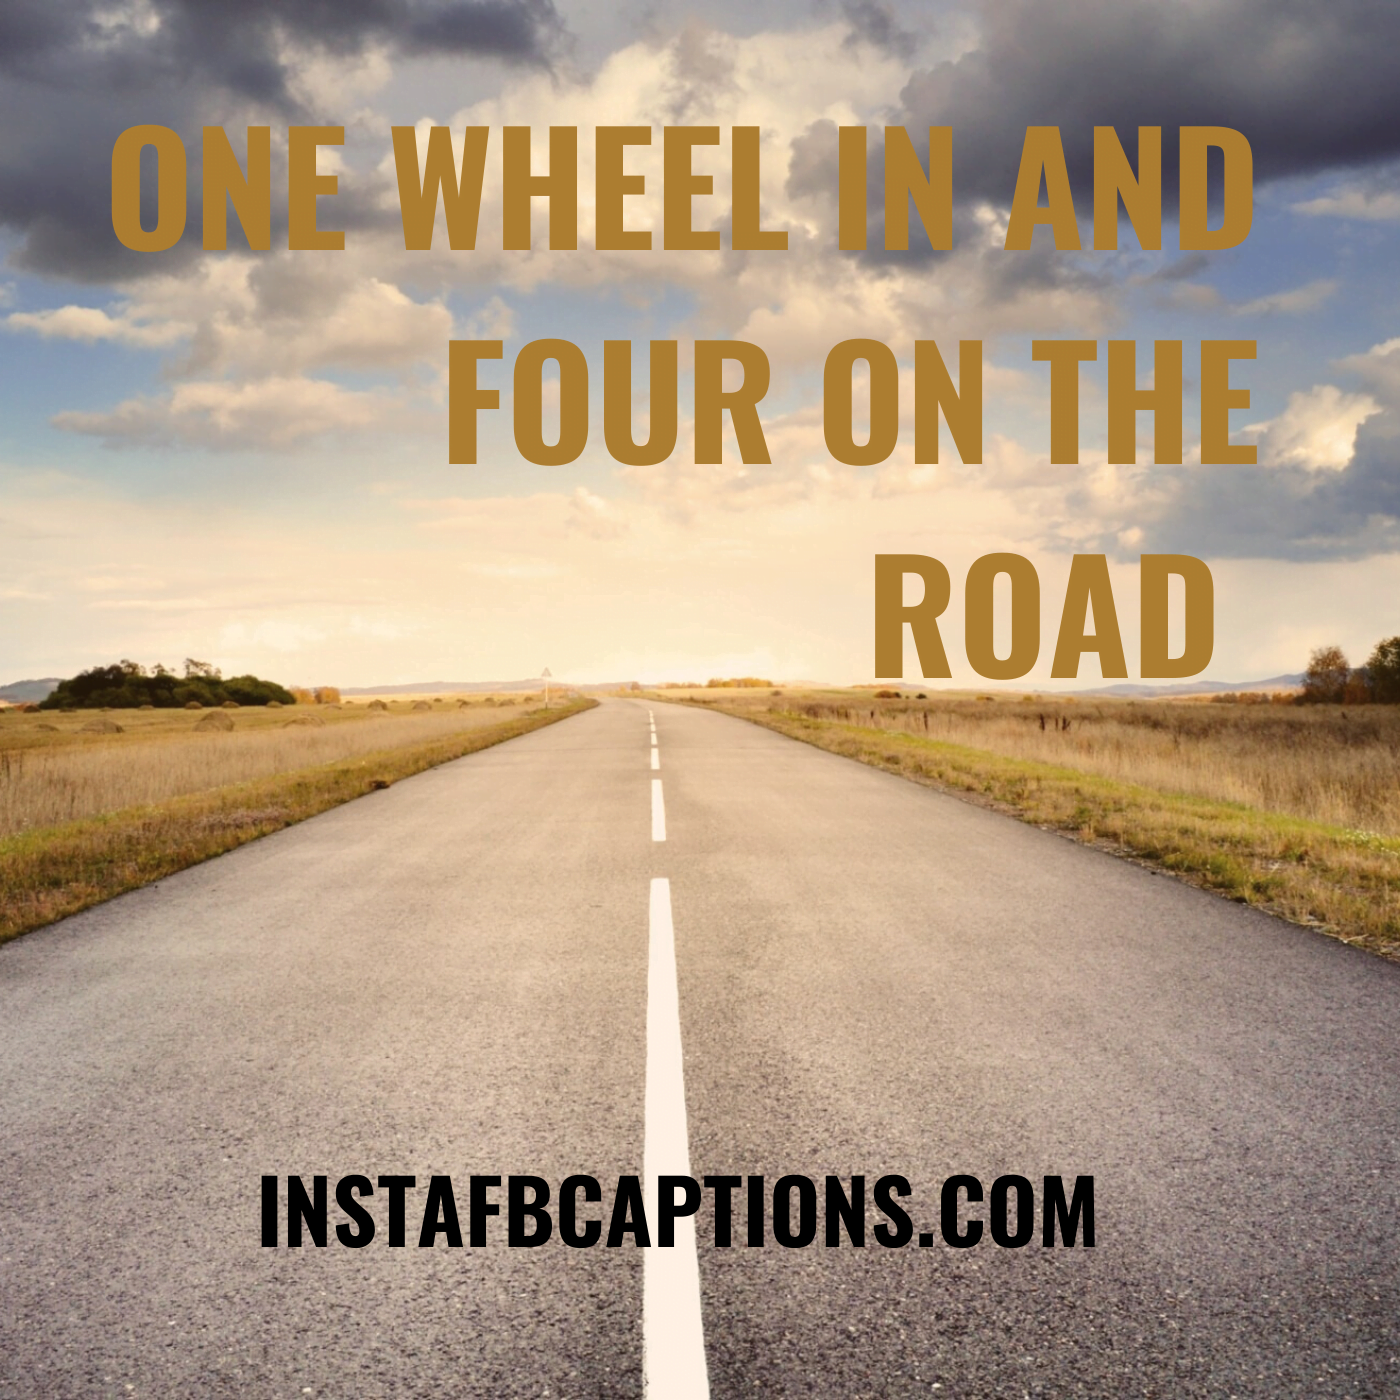 Fun Road Trip With Friends Captions  - Fun Road Trip with Friends Captions - 100 Road Trip Instagram Captions and Quotes in 2022